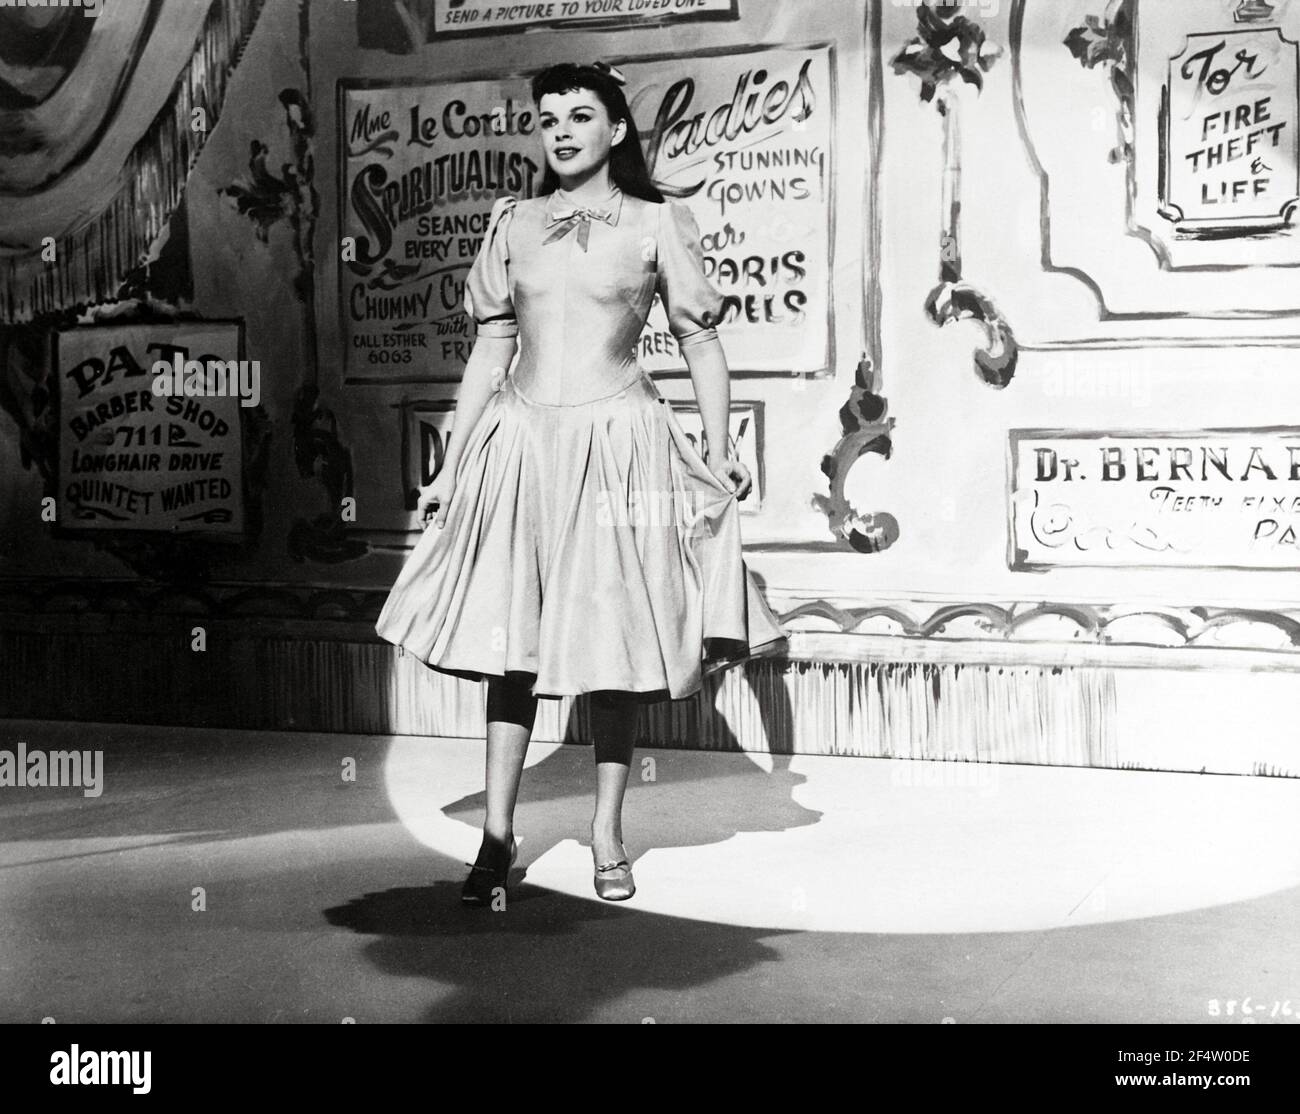 JUDY GARLAND in A STAR IS BORN (1954), directed by GEORGE CUKOR. Credit: WARNER BROTHERS / Album Stock Photo